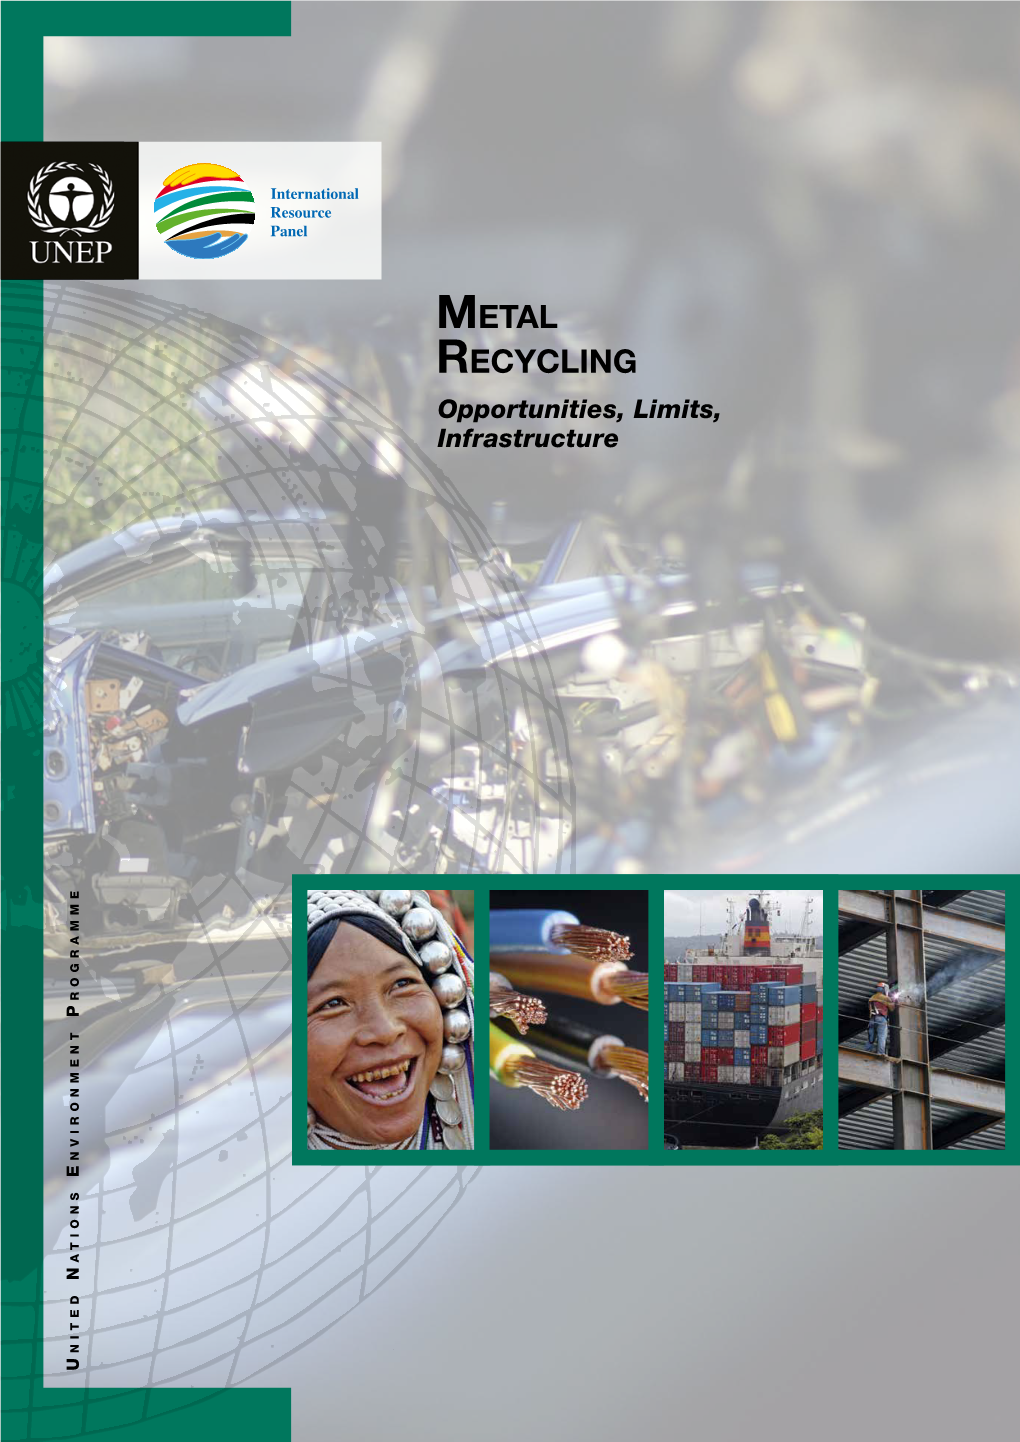 Metal Recycling – Opportunitites, Limits, Infrastructure (Full Report)